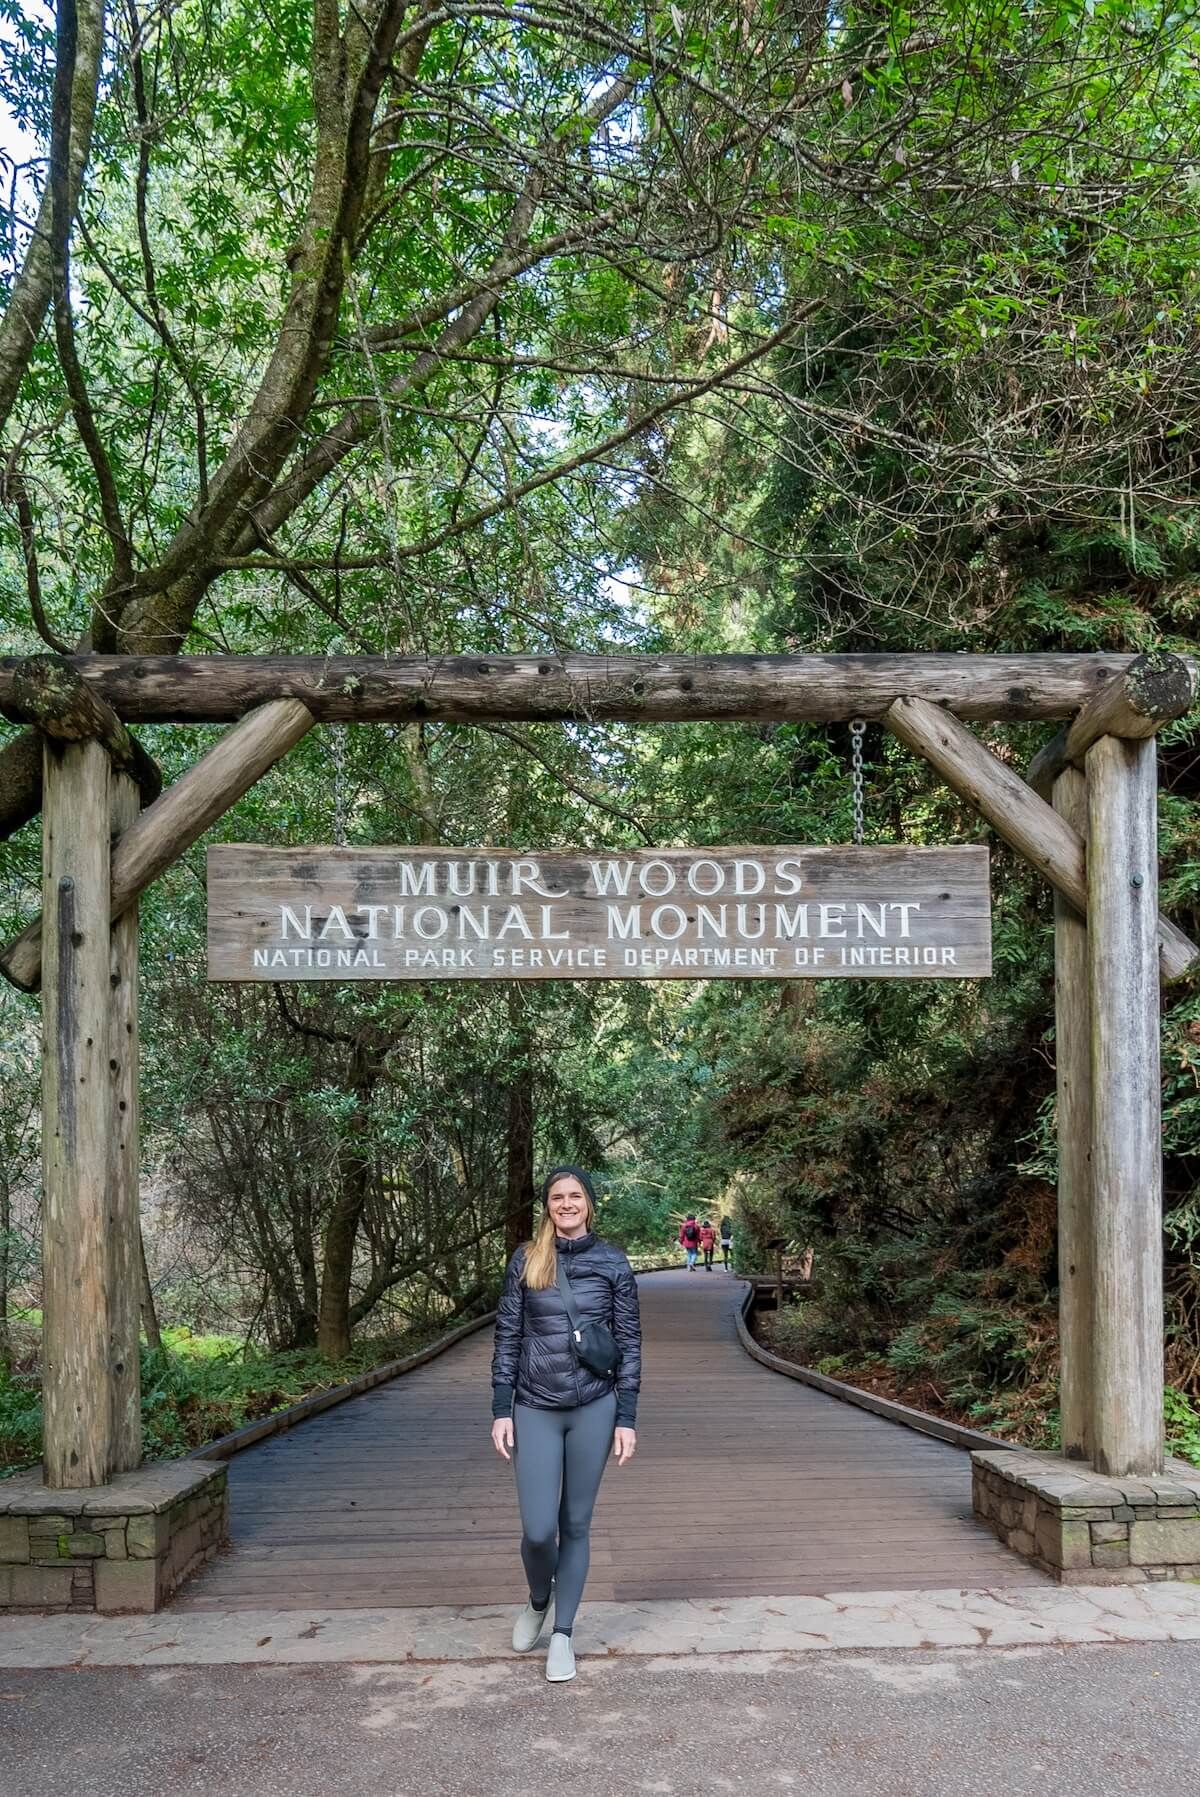 A woman stands under a wooden sign marking the entrance to Muir Woods National Monument, smiling at the camera.